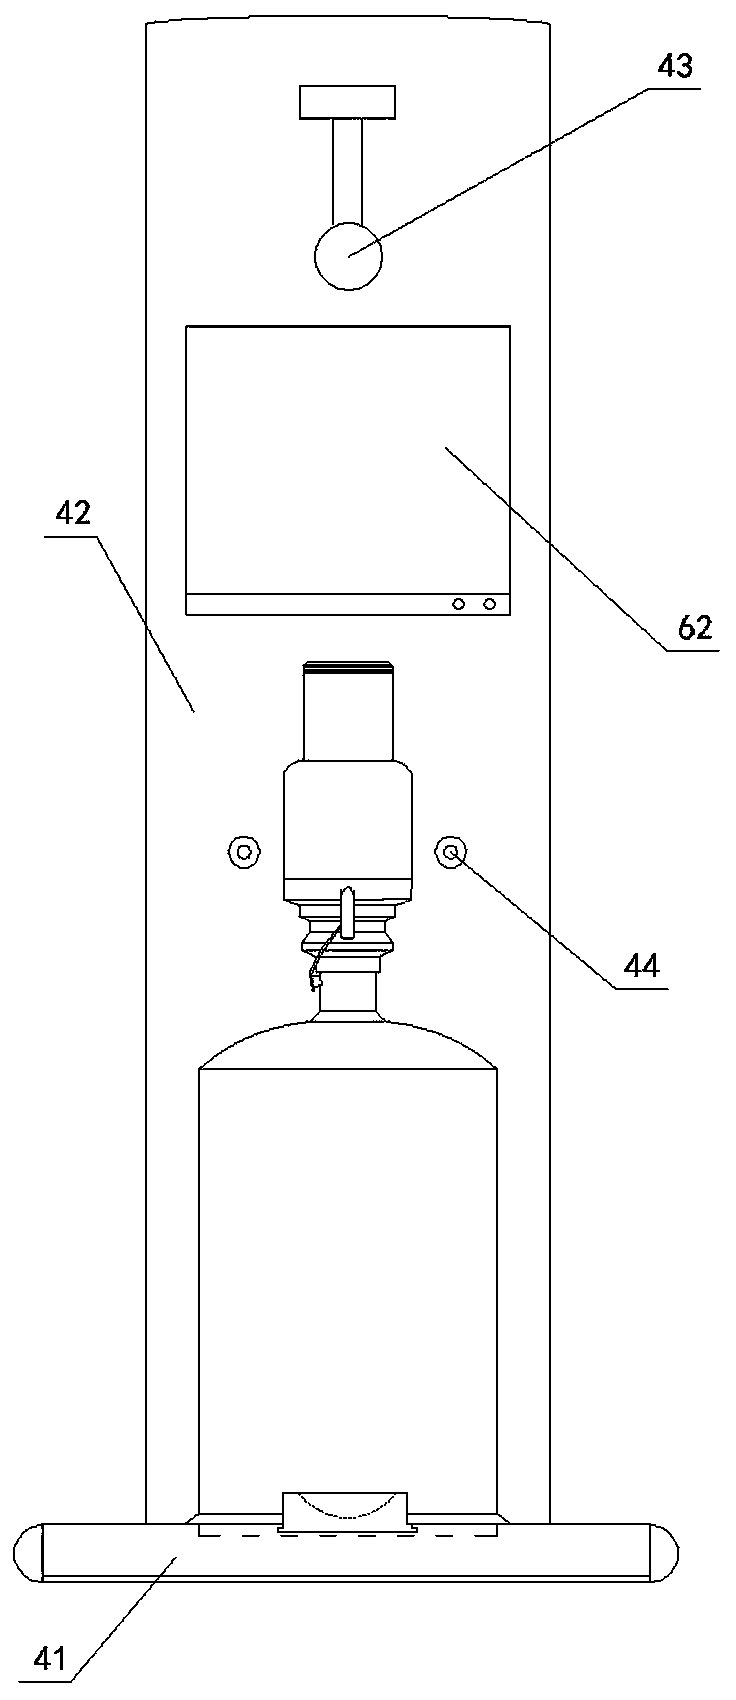 Manual water-pressing device with automatic weight sensing function